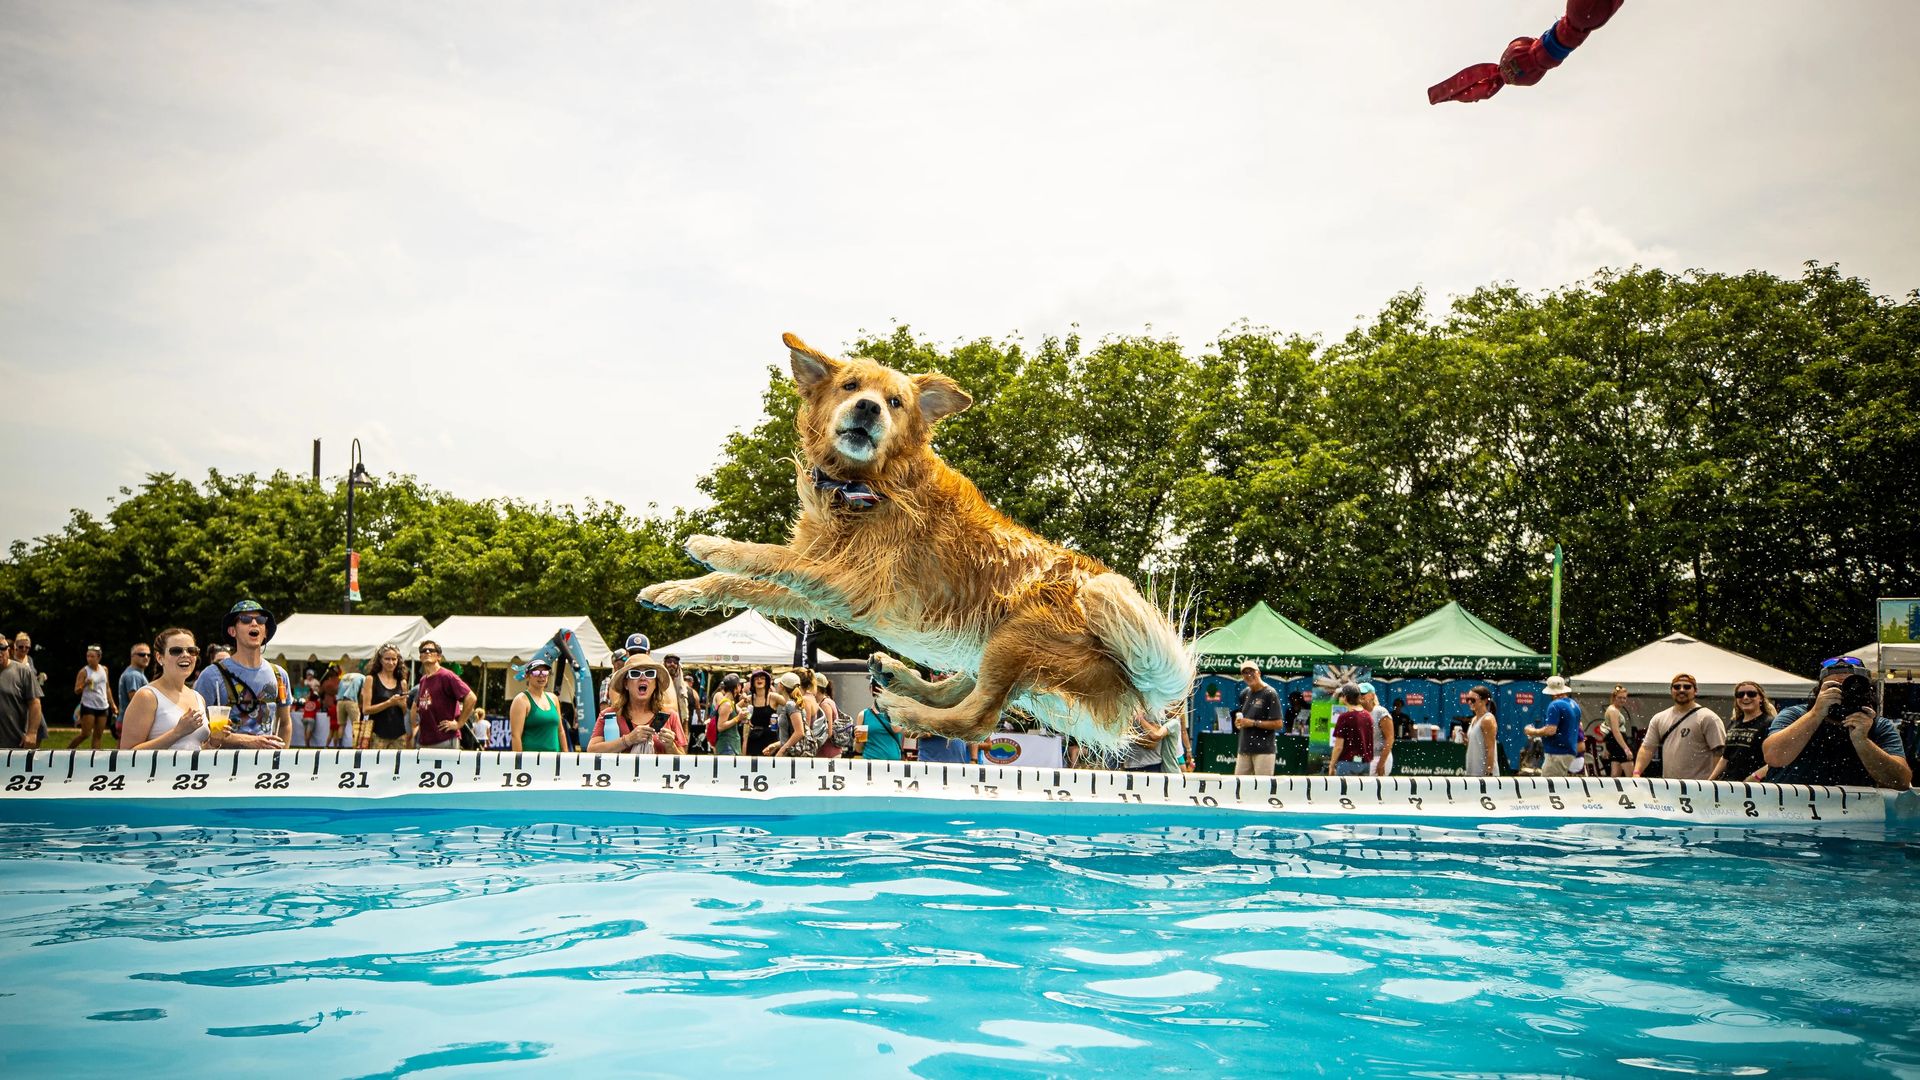 A dog jumps into a massive pool surrounded by a crowd 